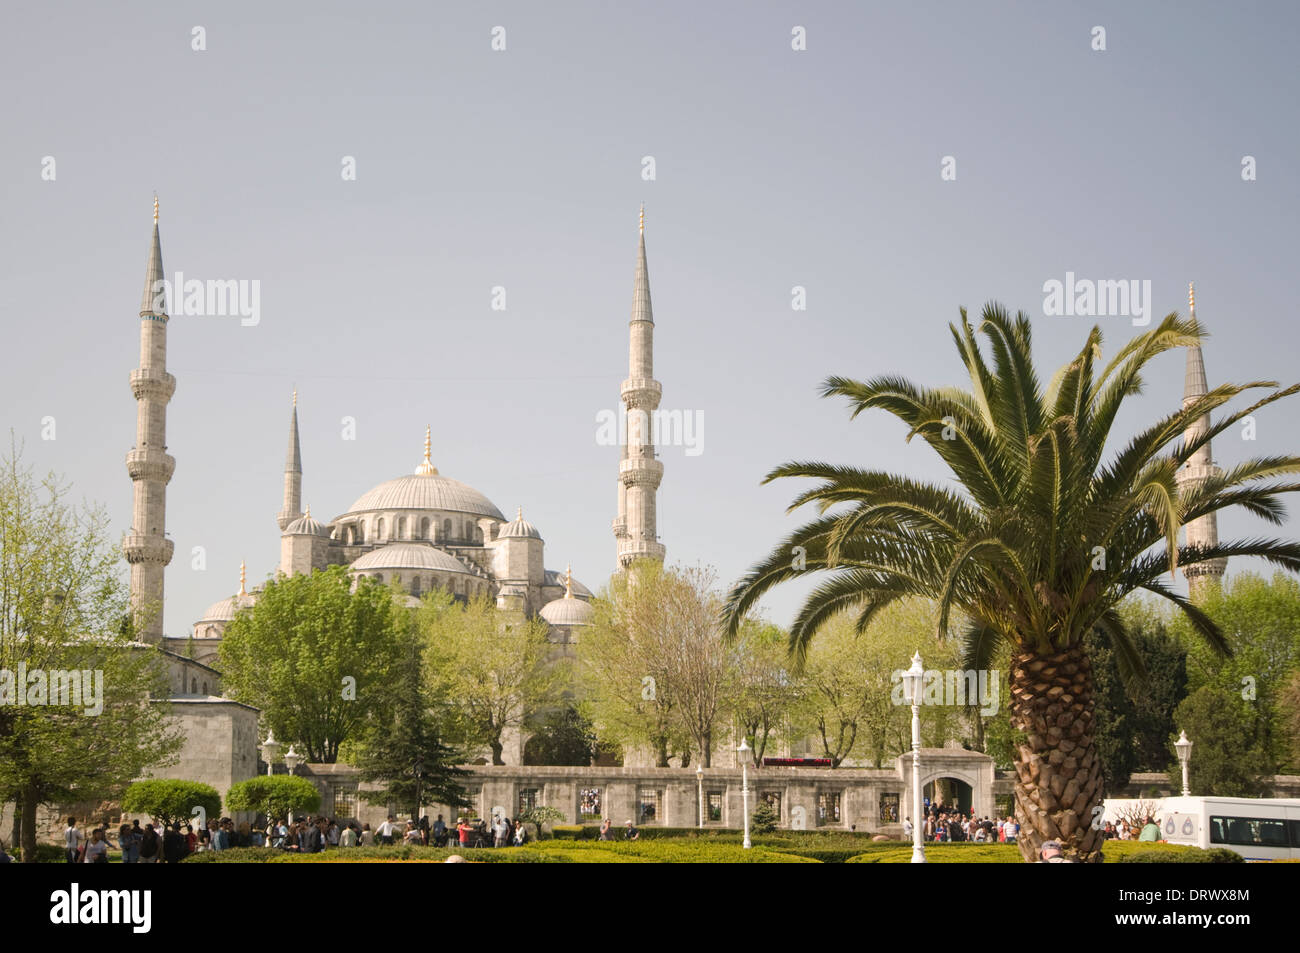 EUROPE/ASIA, Turkey, Istanbul, front of Blue Mosque (1606-1616), constructed by Sultan Ahmet I Stock Photo